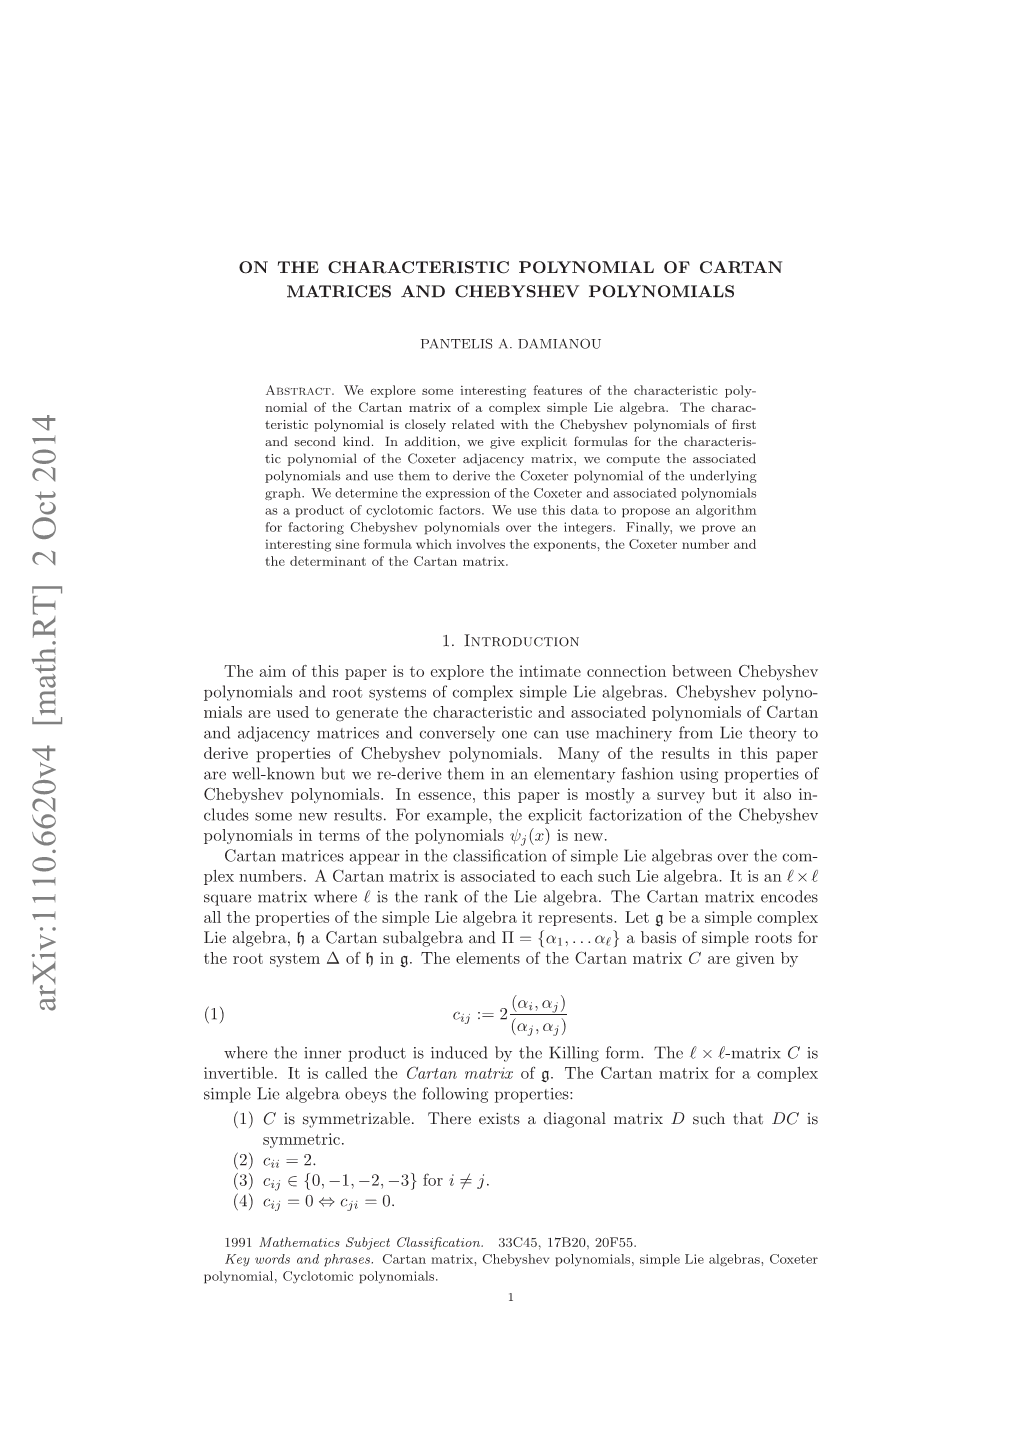 On the Characteristic Polynomial of Cartan Matrices and Chebyshev Polynomials